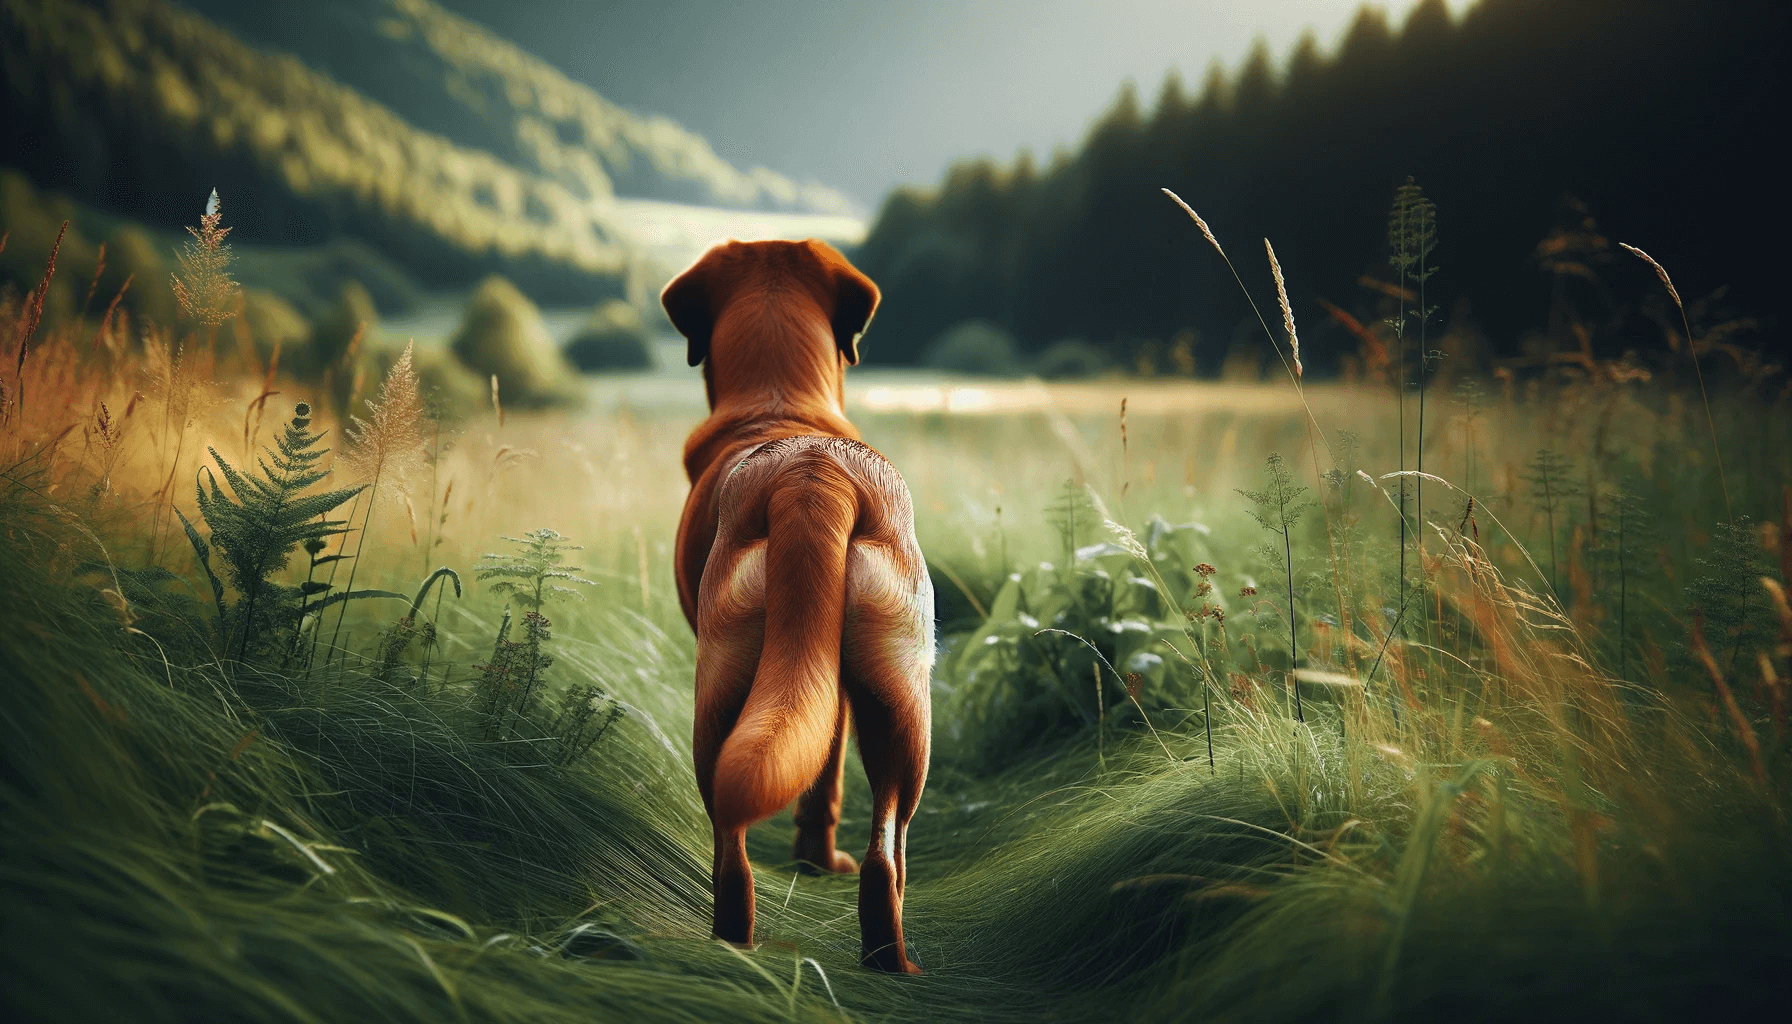 Red Fox Labrador Retriever standing in a lush meadow viewed from behind